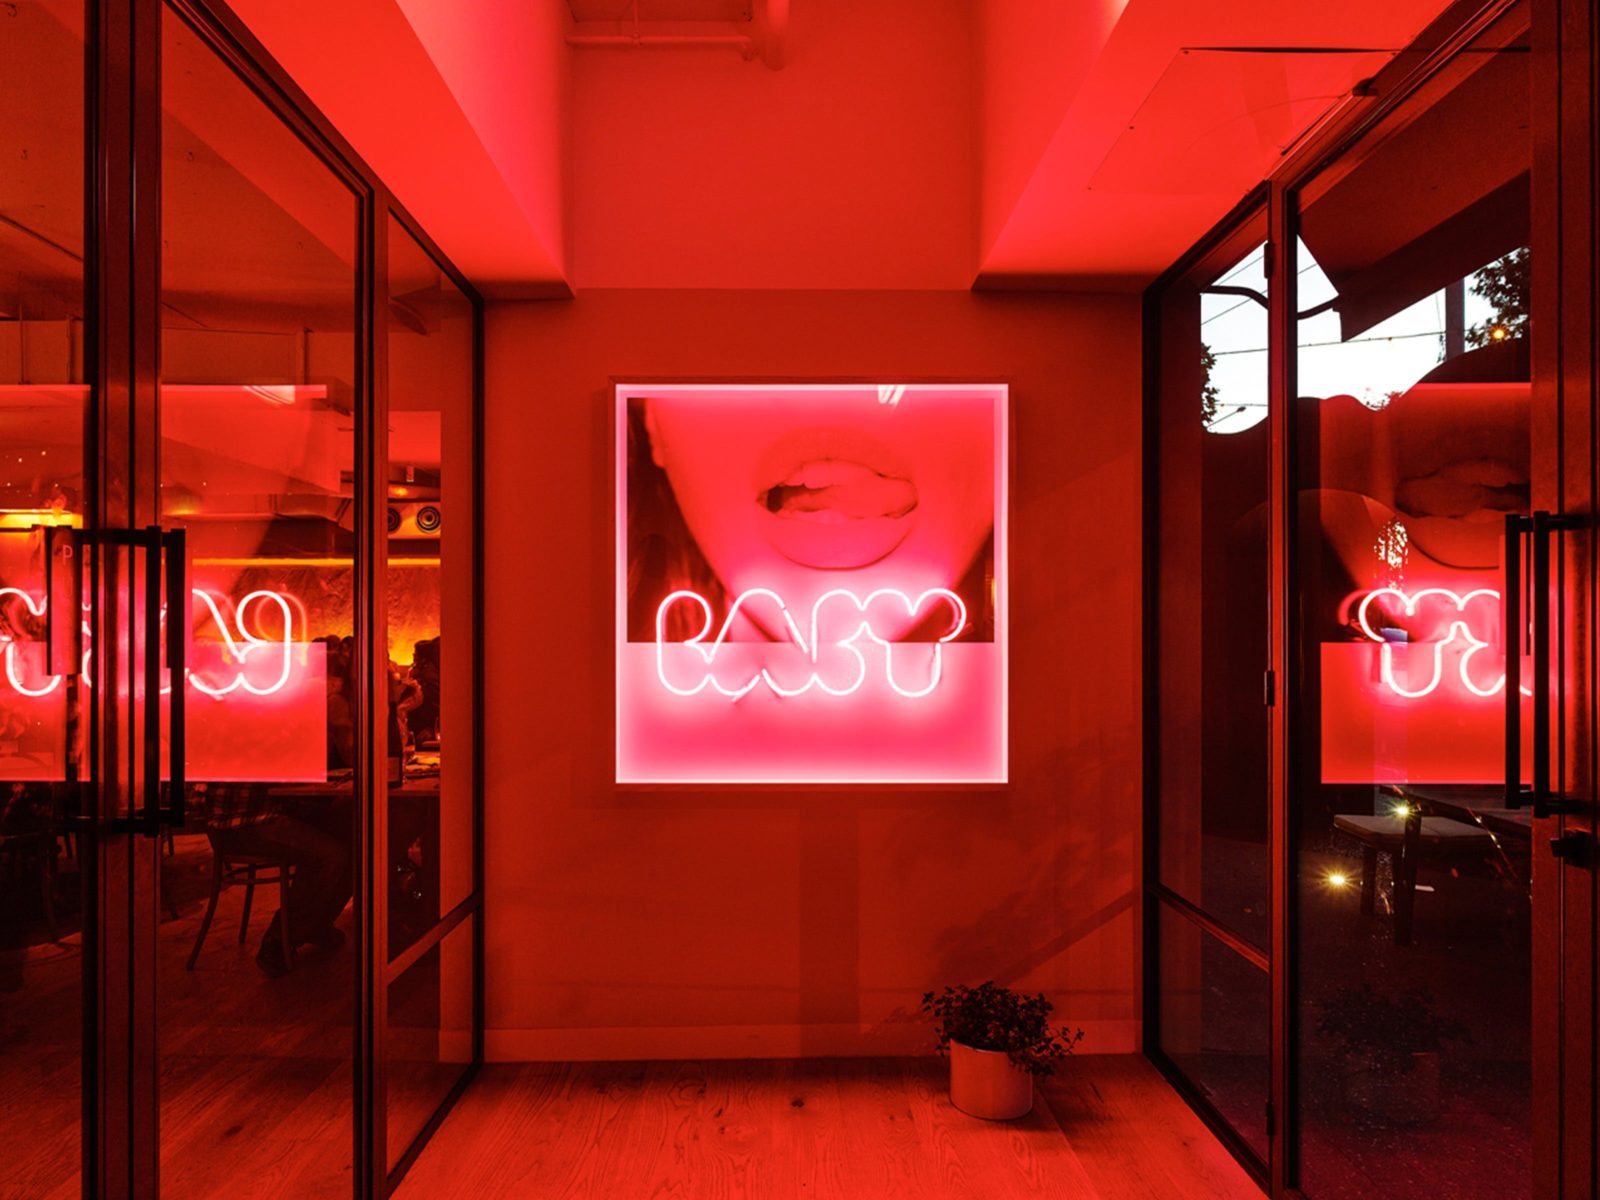 Room with glass doors on either side, facing a light box image of a female red neon sign "Baby".